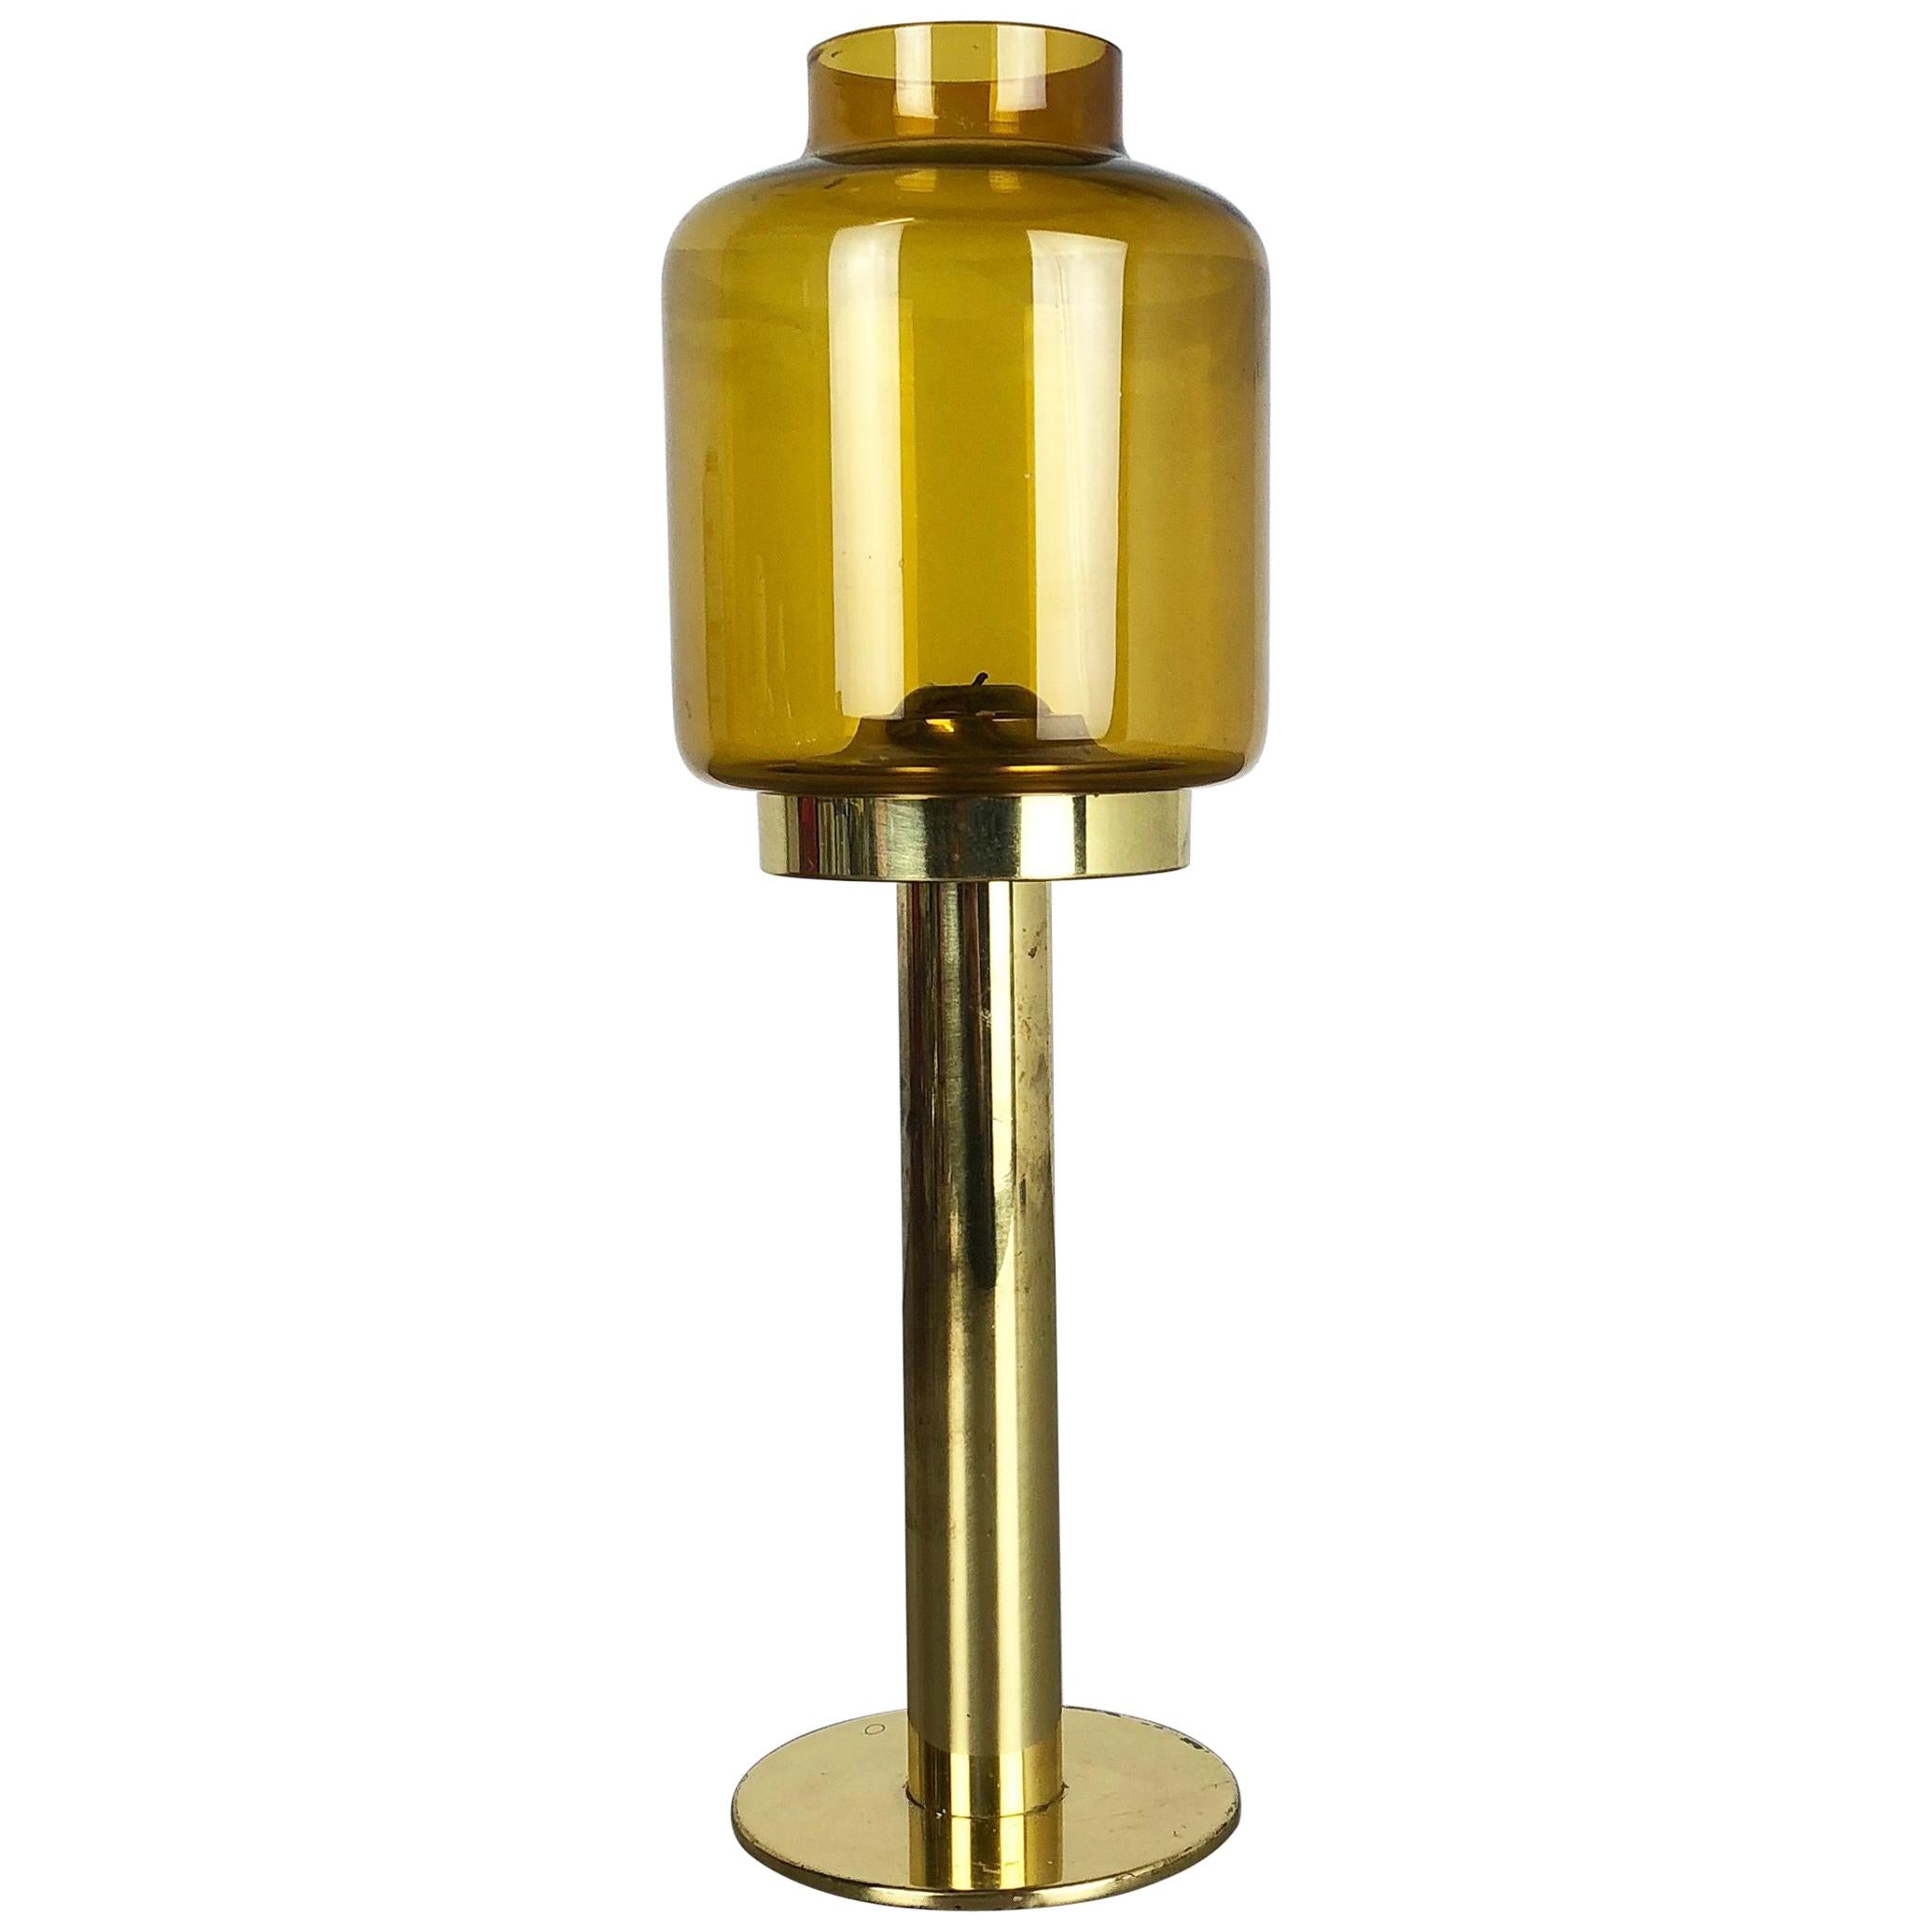 1960s Brass and Glass "Claudia" Candleholder Made by Hans-Agne Jakobson, Sweden